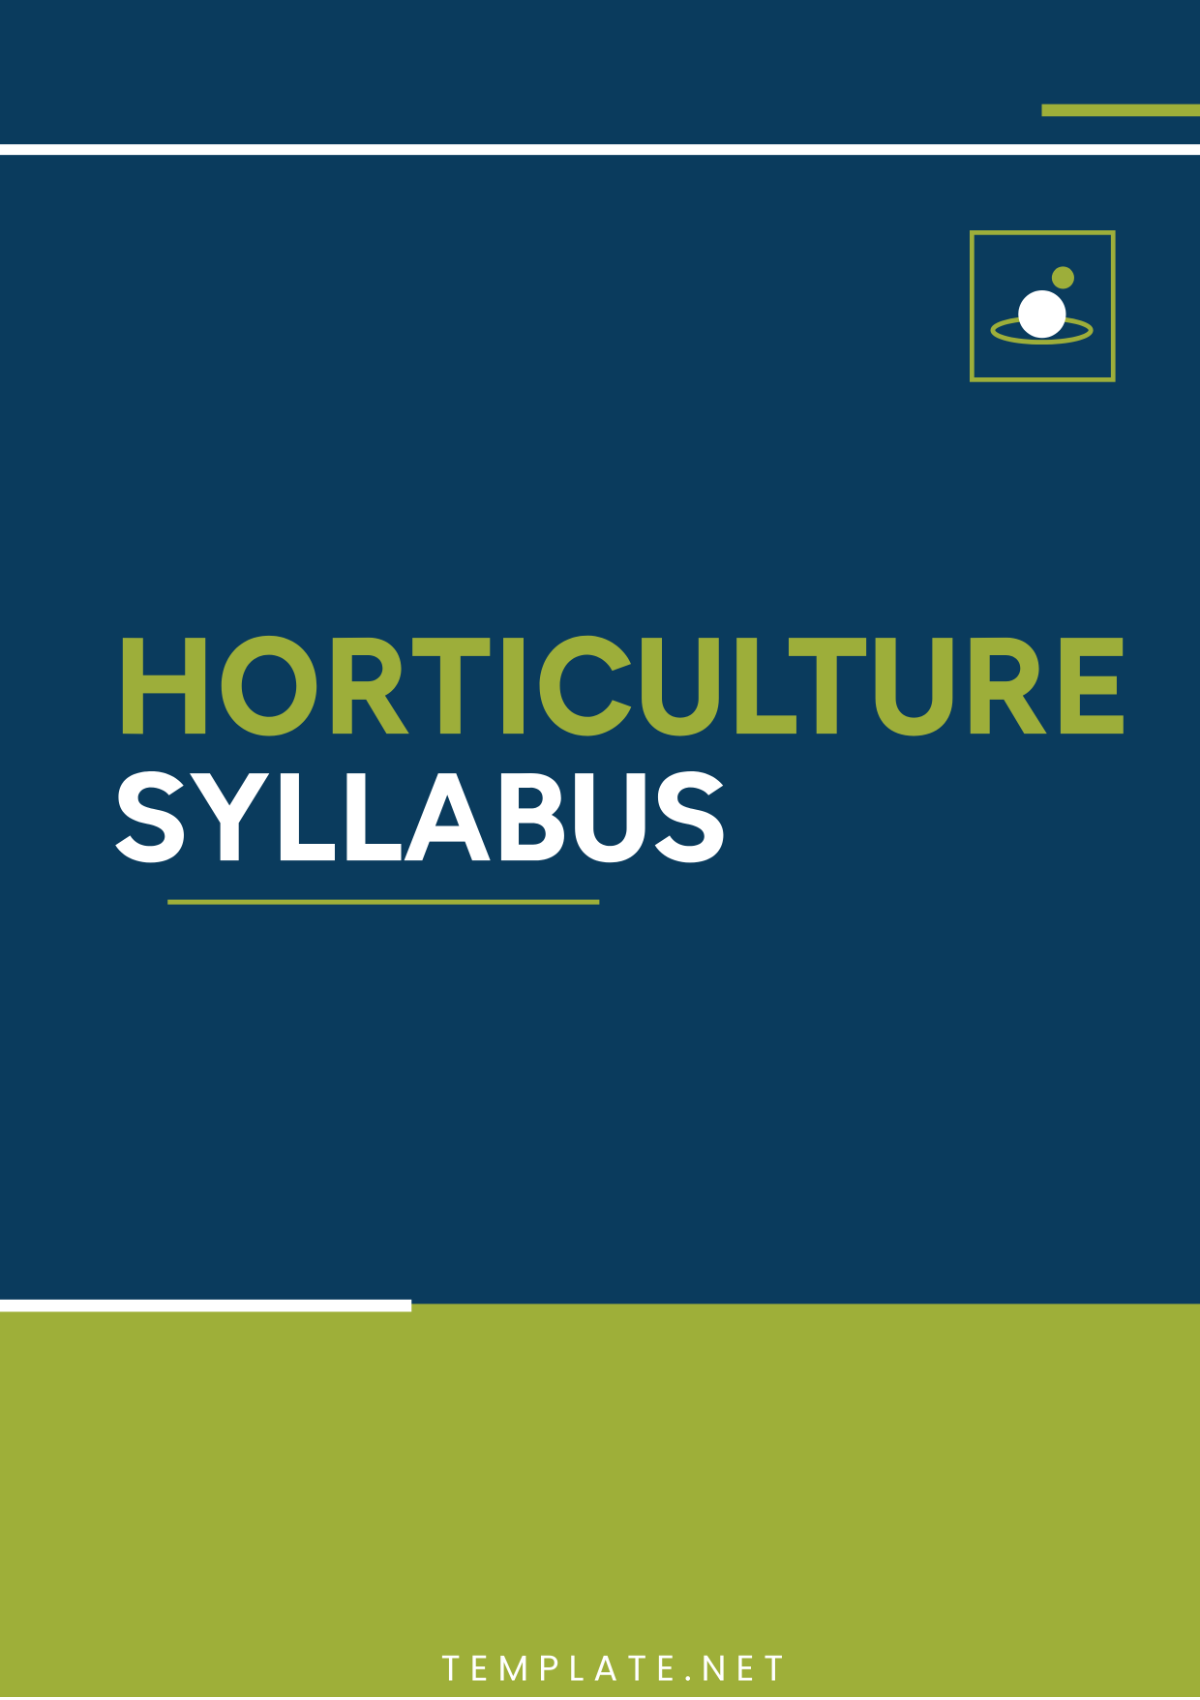 Horticulture Syllabus Template